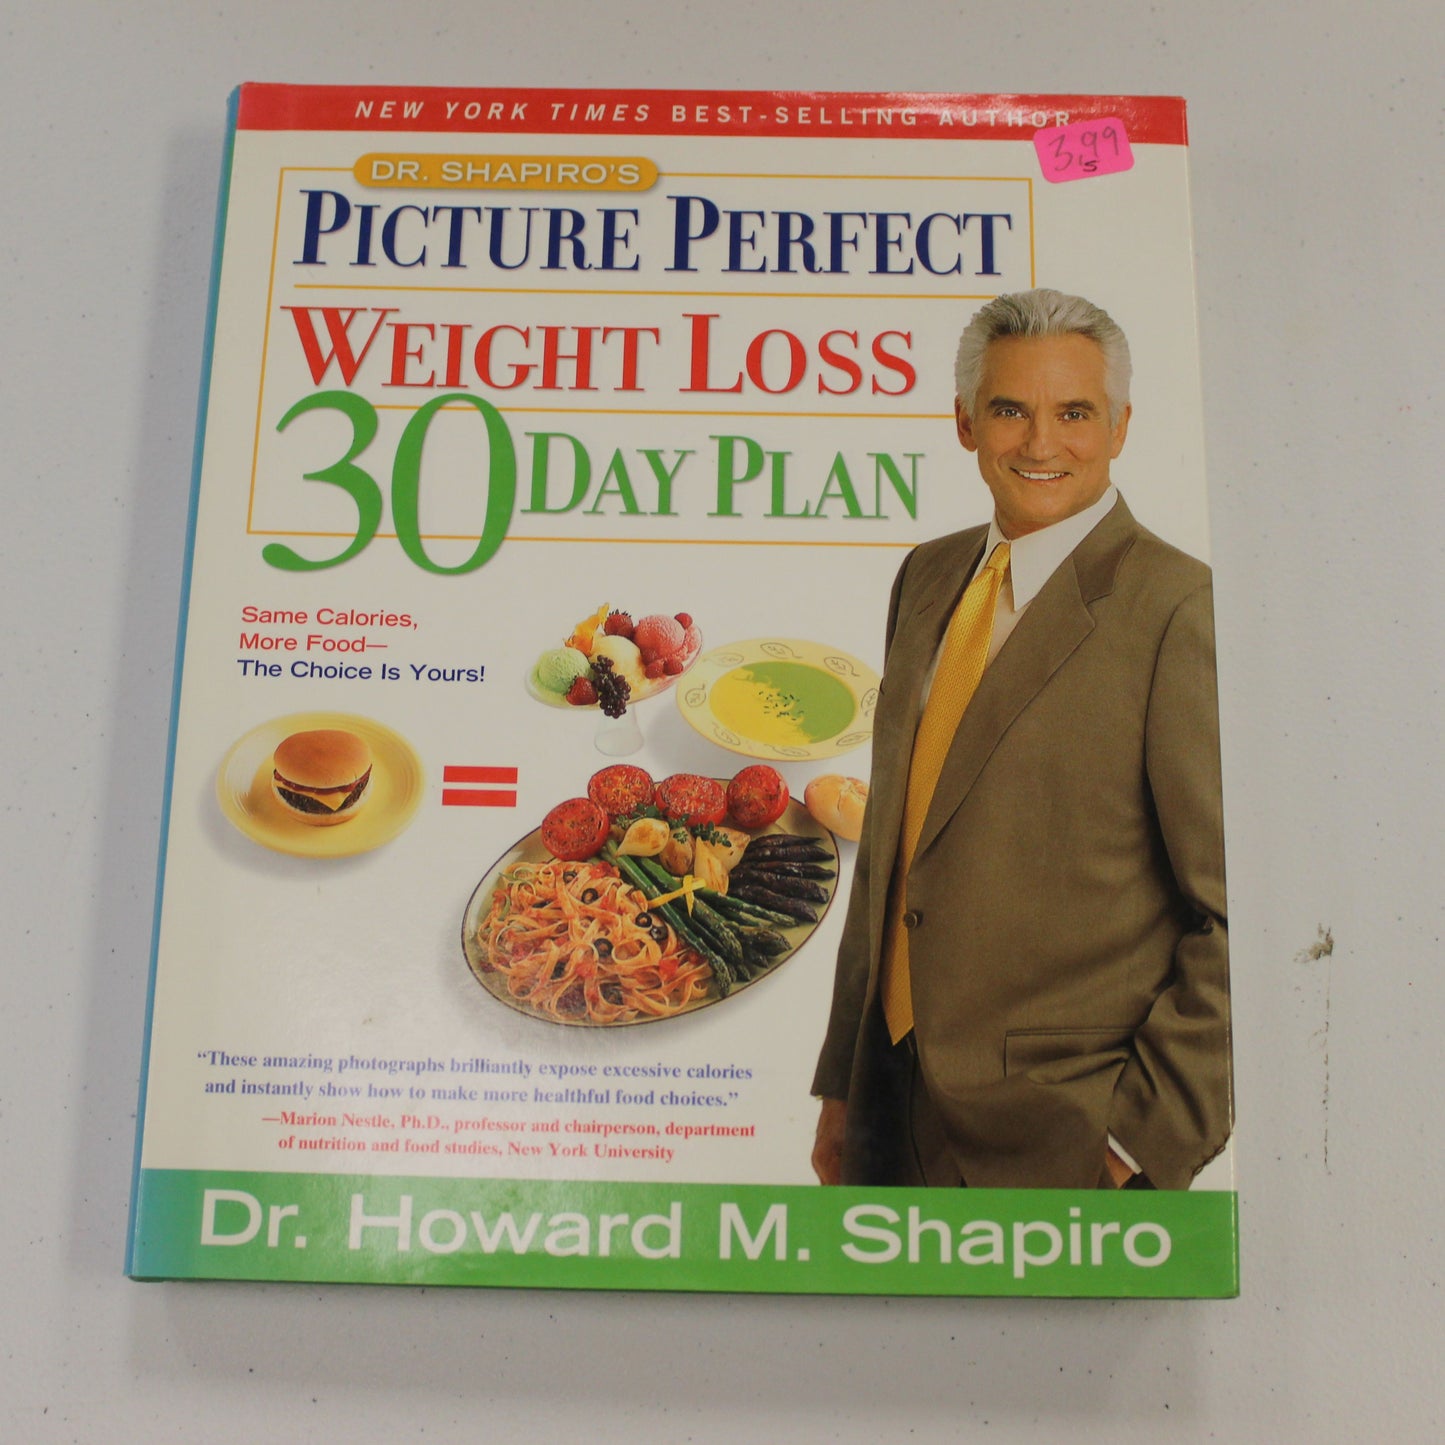 PICTURE PERFECT WEIGHT LOSS 30 DAY PLAN